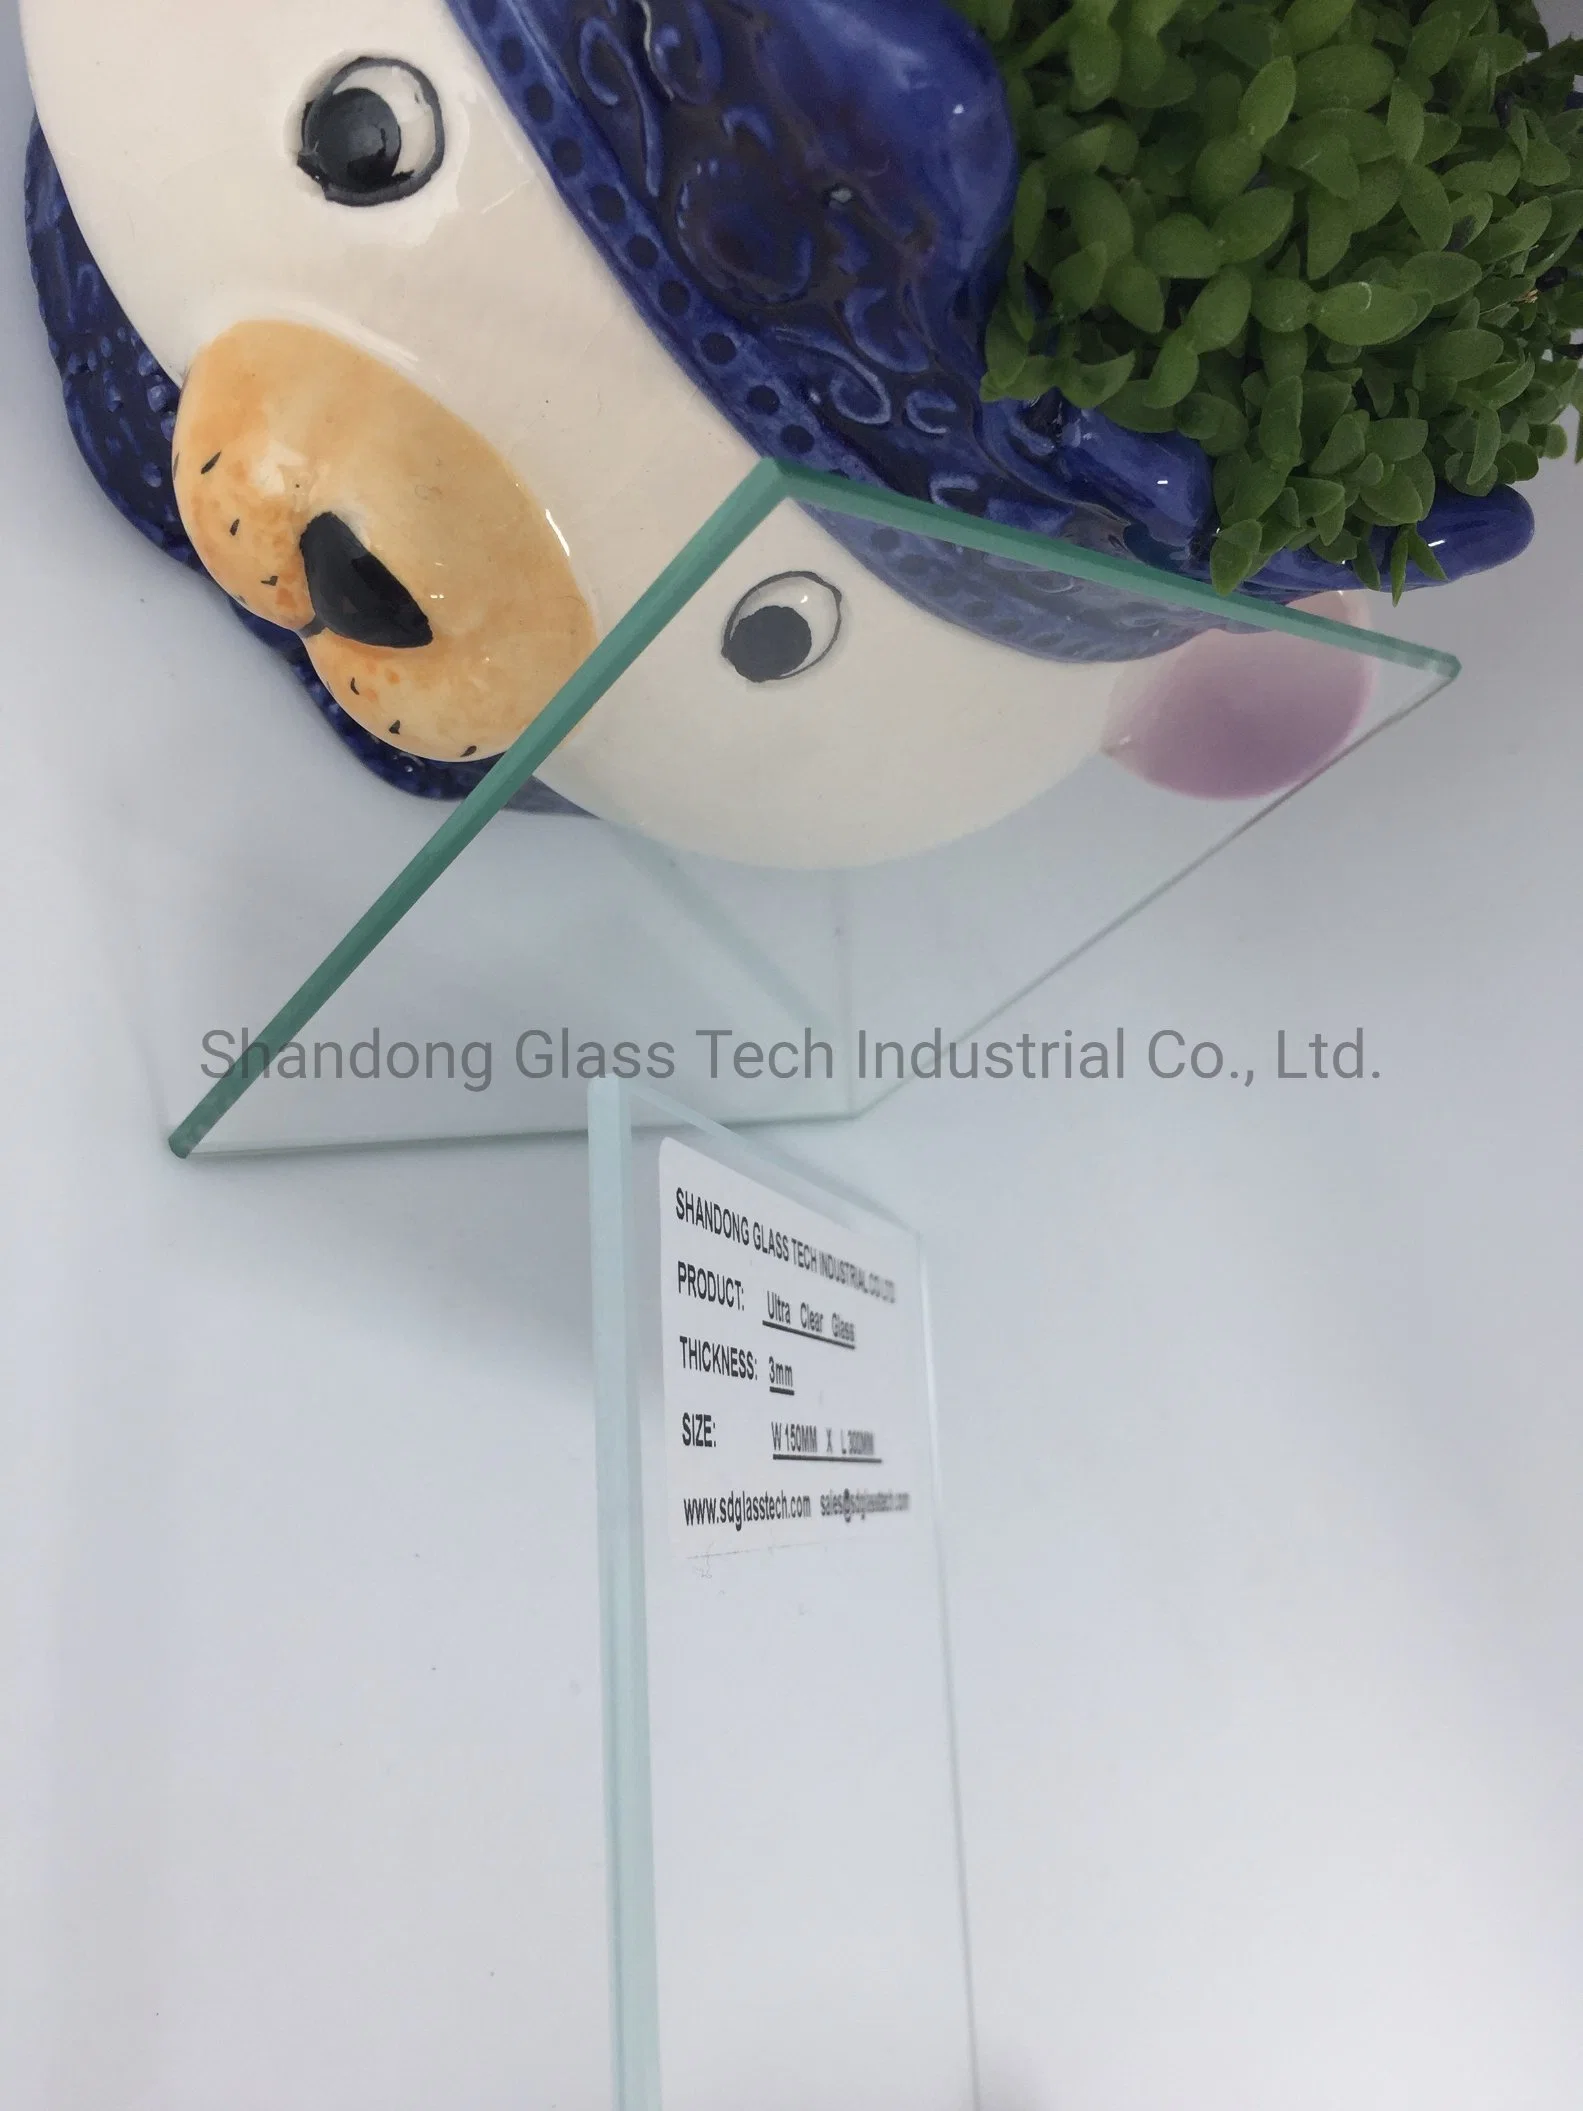 6mm 10mm Ultra Clear Tempered Glass Sheet/Low Iron Toughed Glass Panels with Ass/Nzs2208 Certificate and Extra Clear Float Glass with End Cap Packing